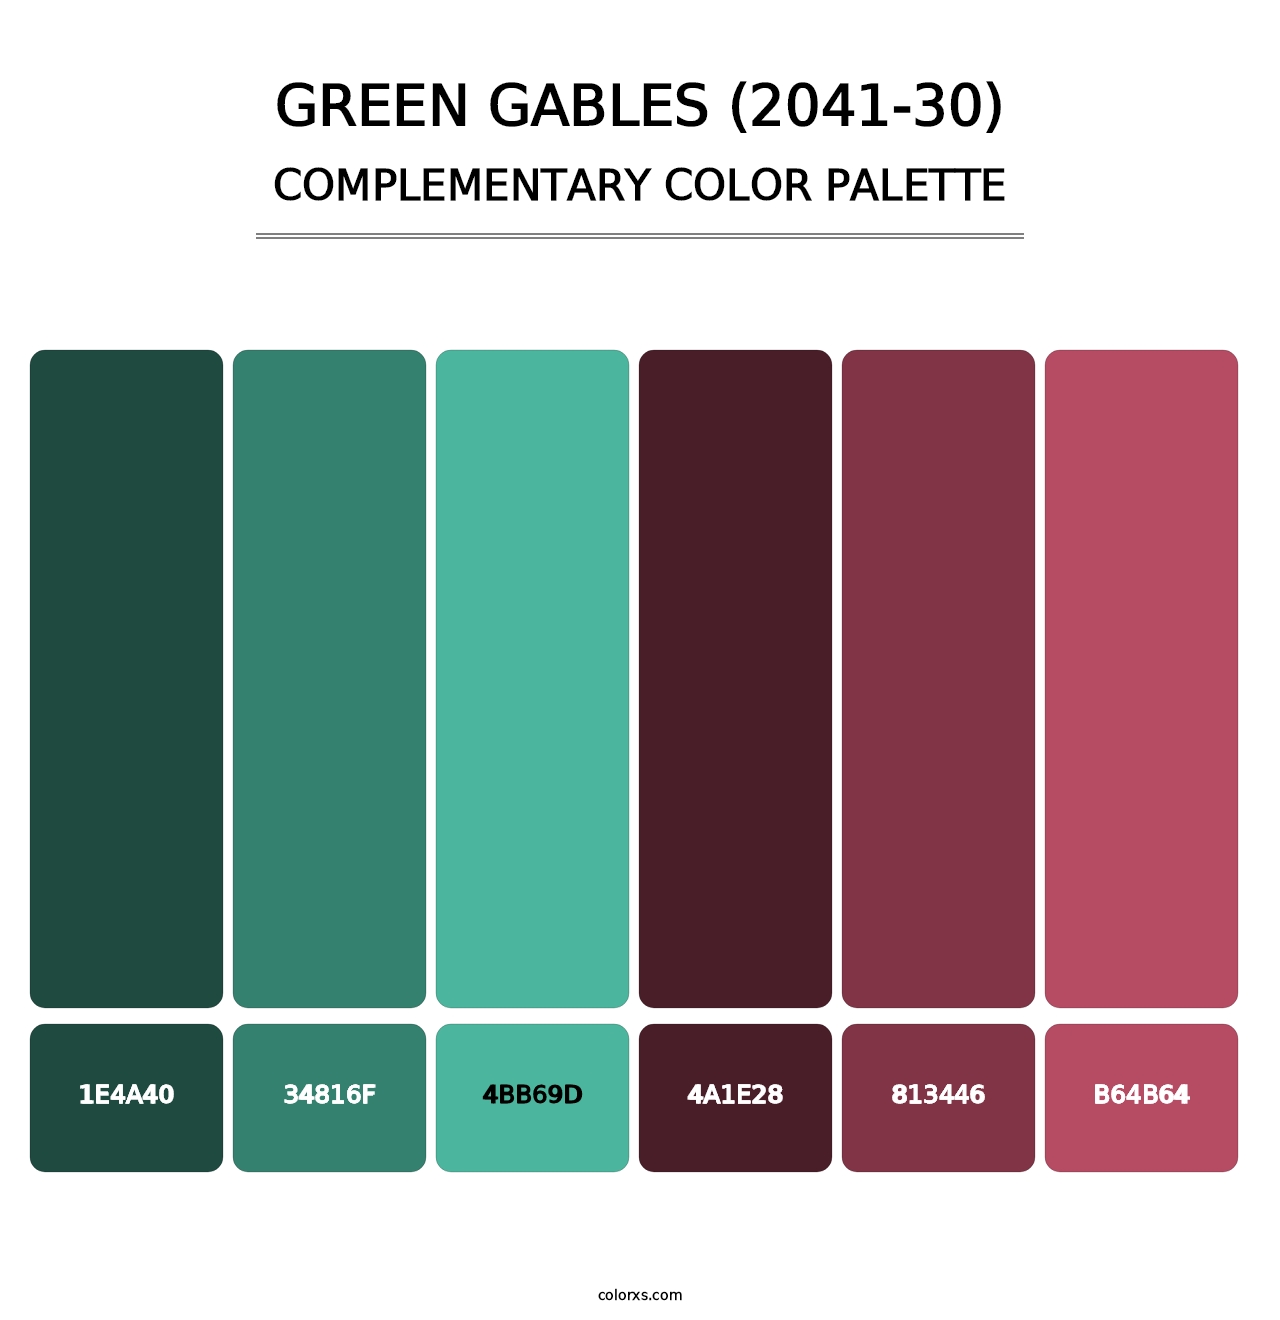 Green Gables (2041-30) - Complementary Color Palette